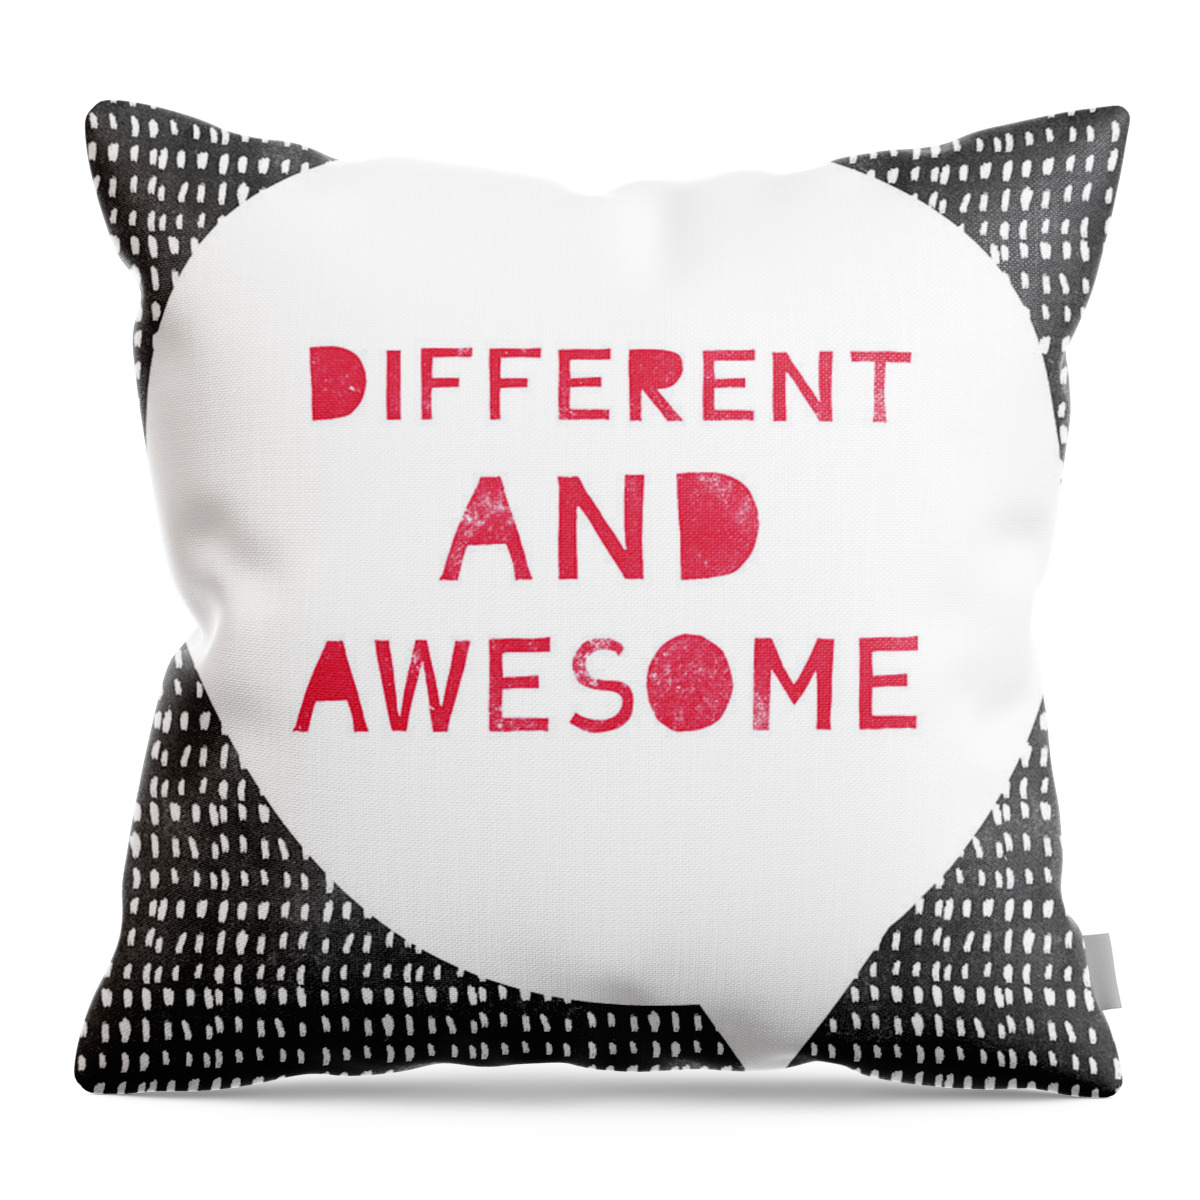 Quote Throw Pillow featuring the mixed media Different And Awesome Red- Art by Linda Woods by Linda Woods